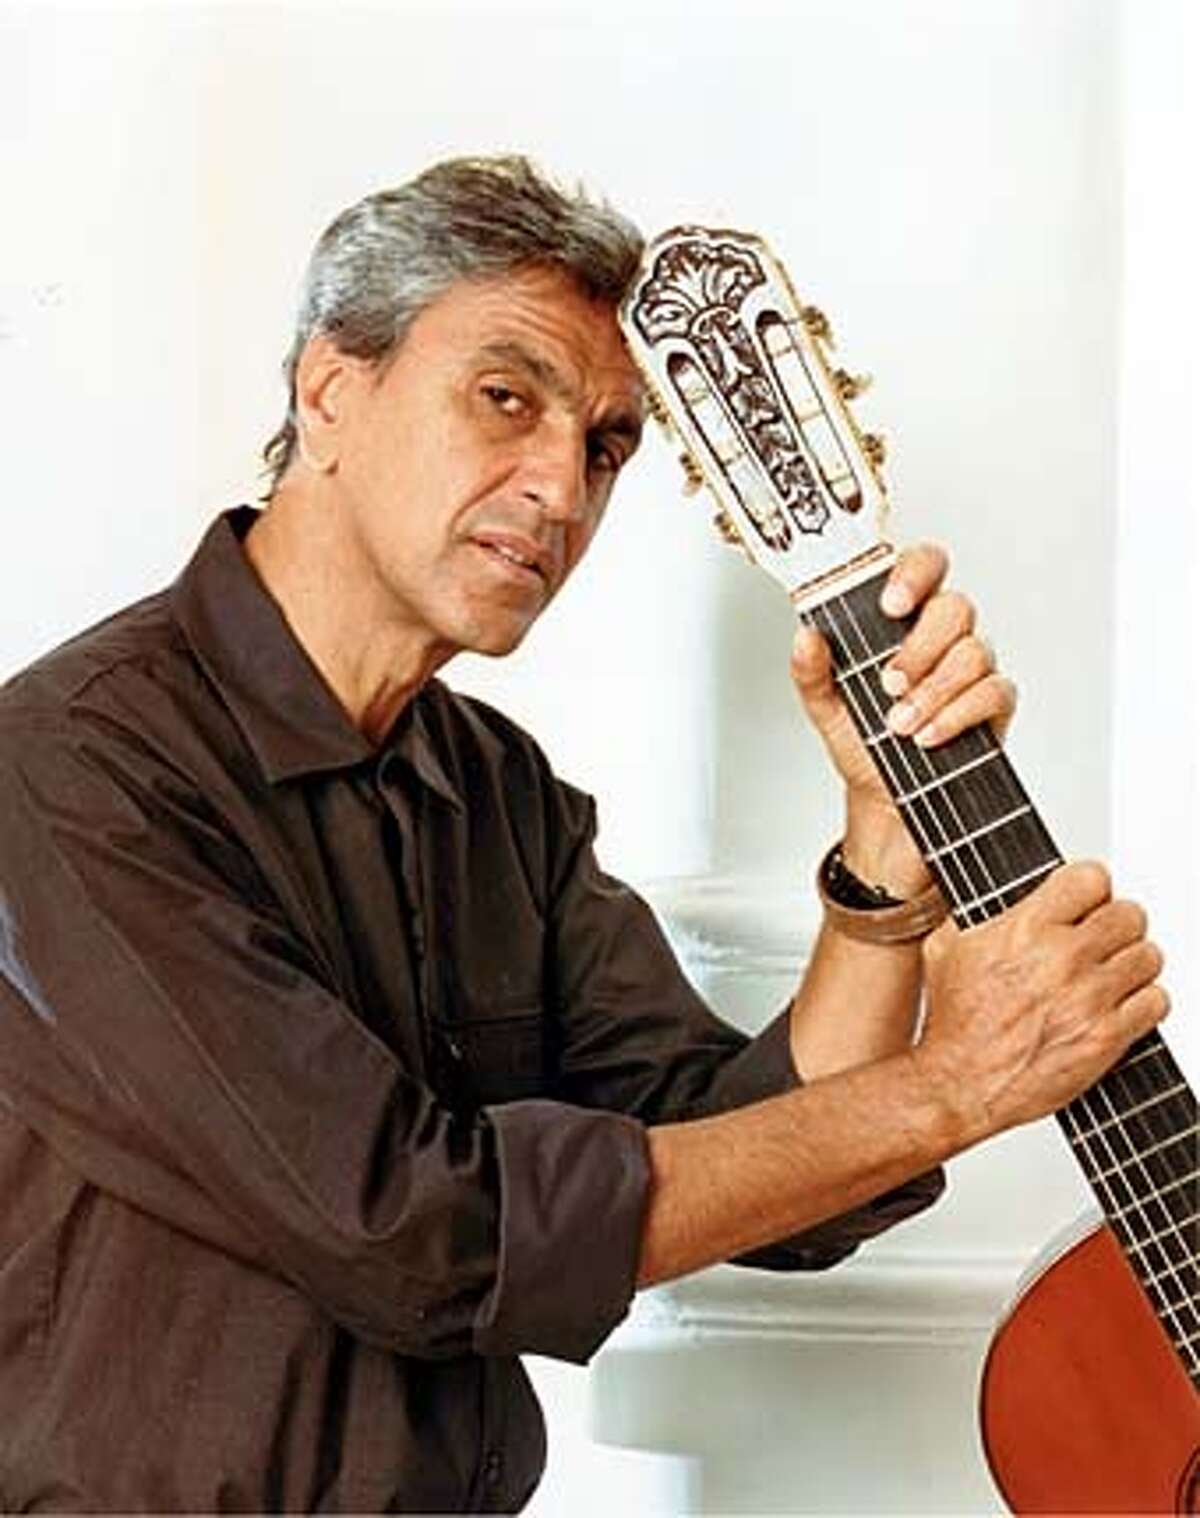 Caetano Veloso: His San Francisco concert could be supercharged.